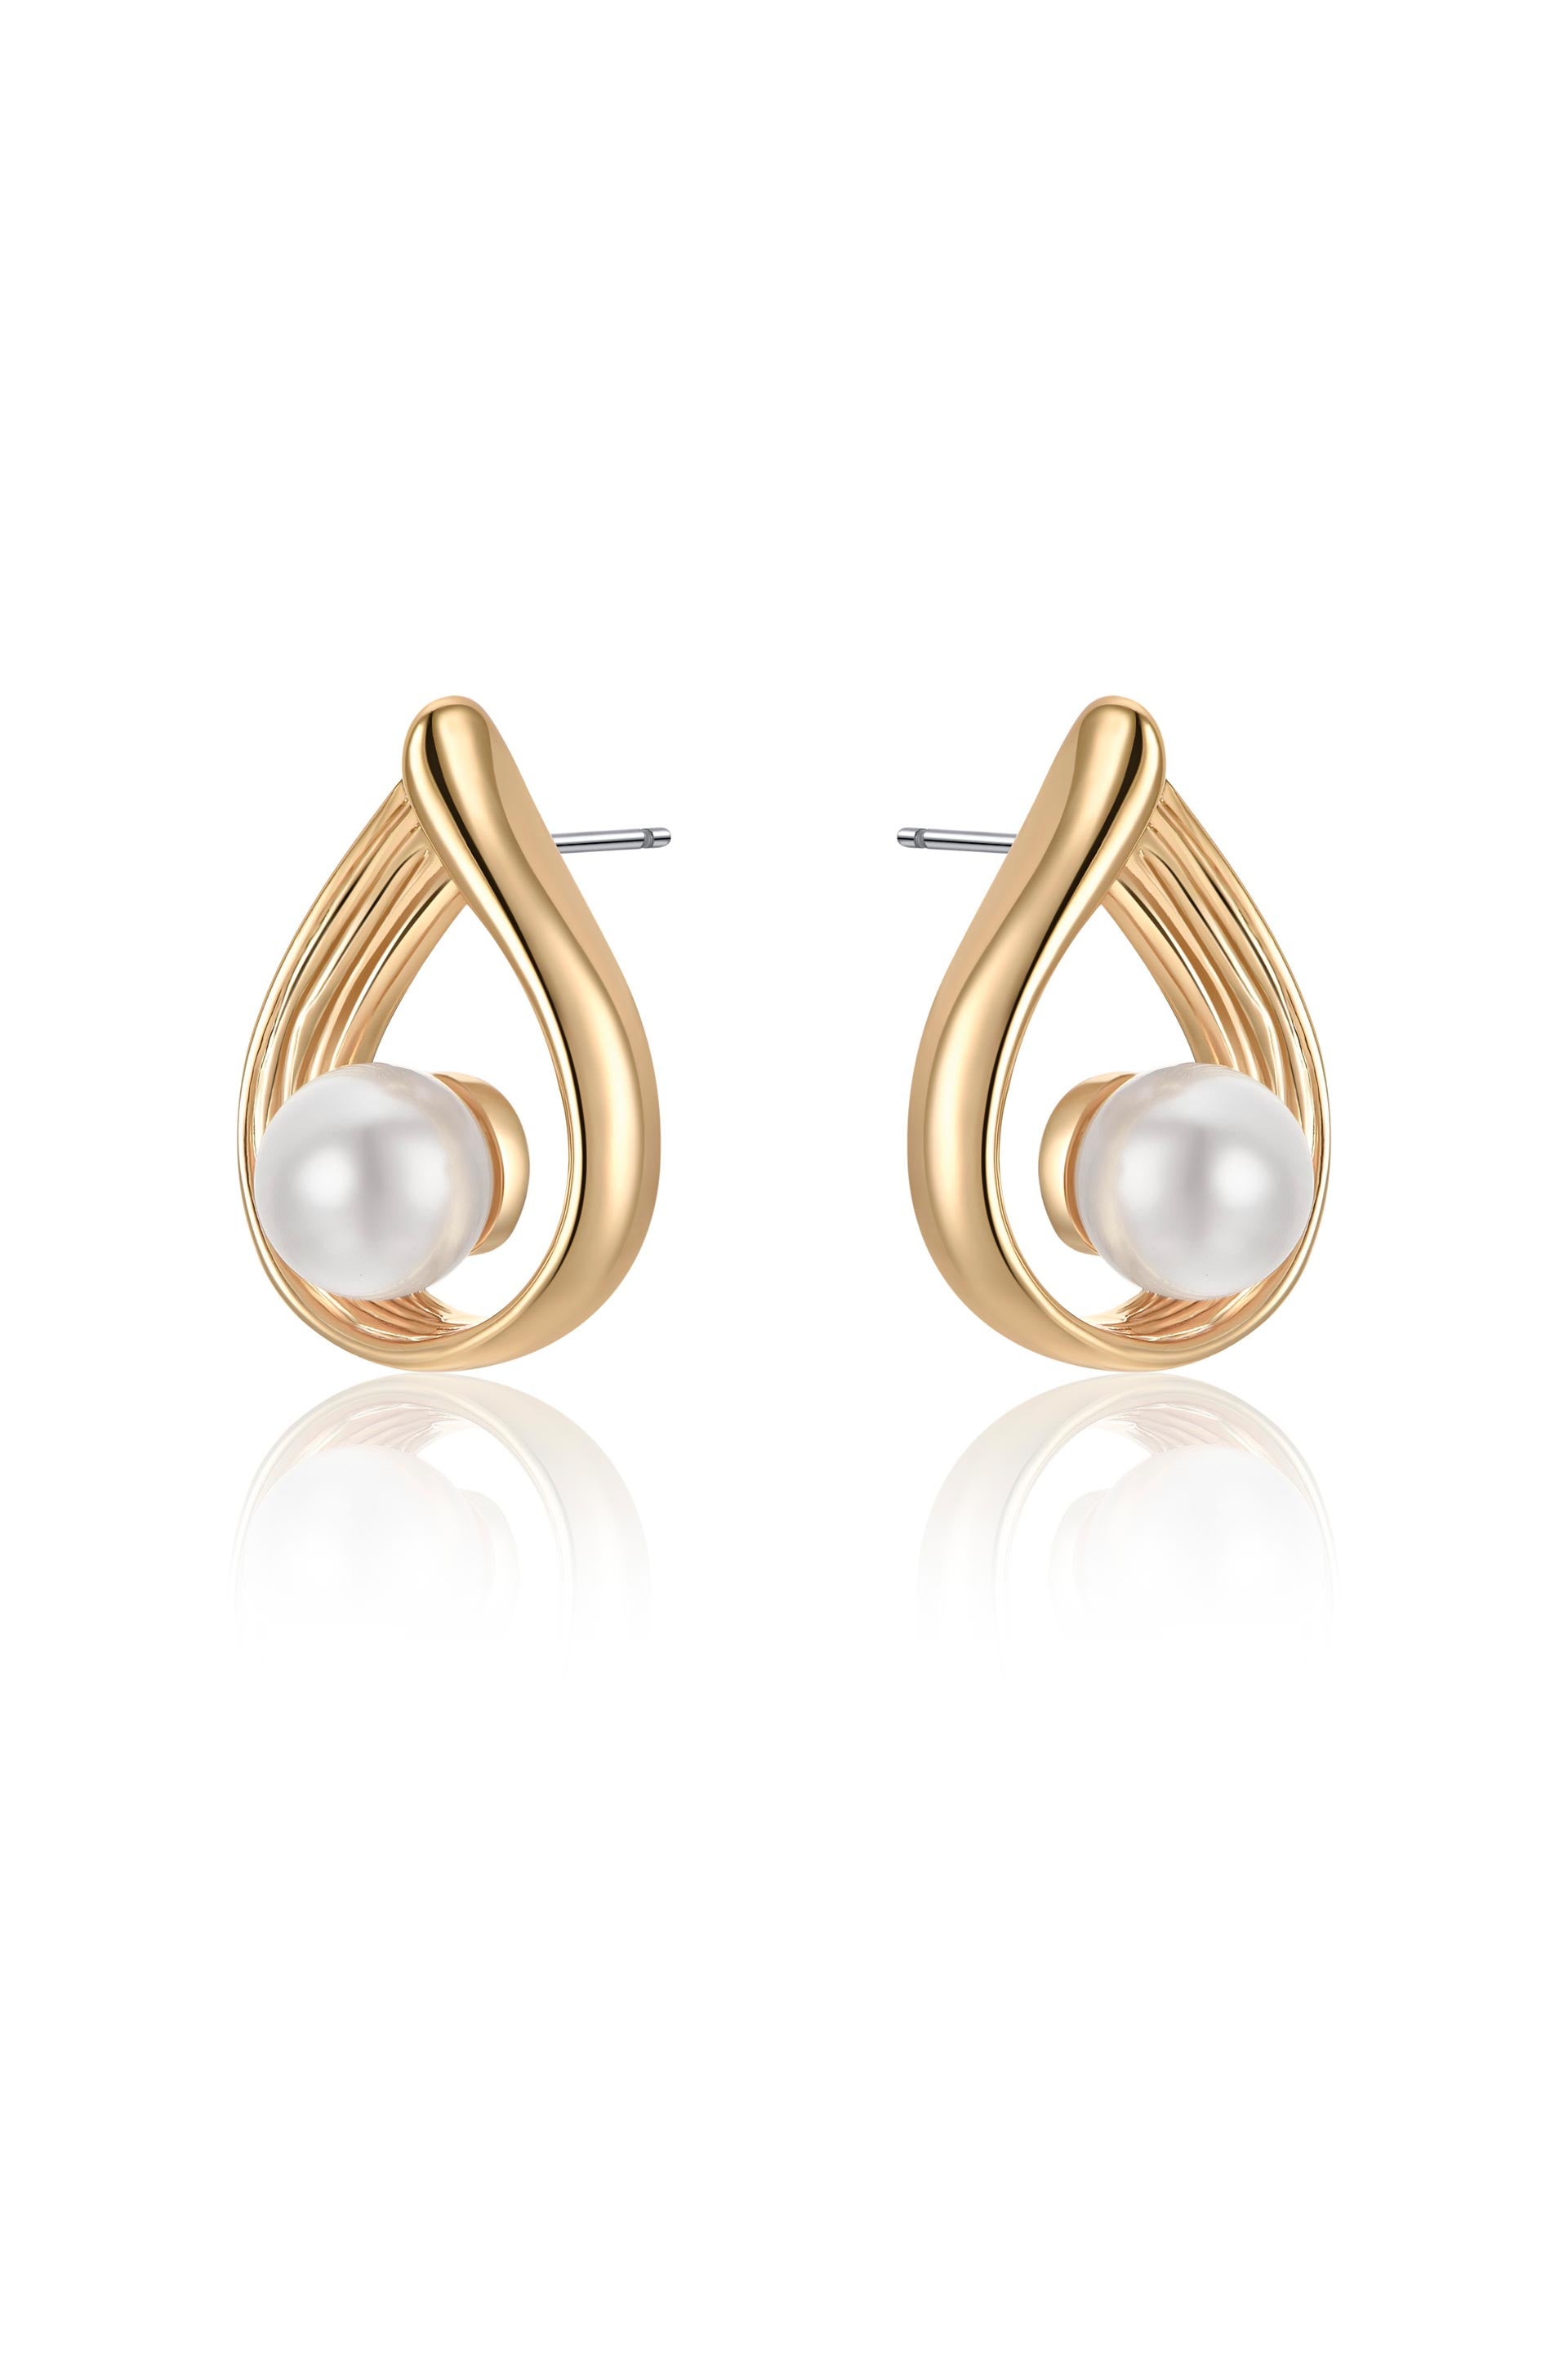 Golden Teardrop and Pearl 18k Gold Plated Earrings on white side view